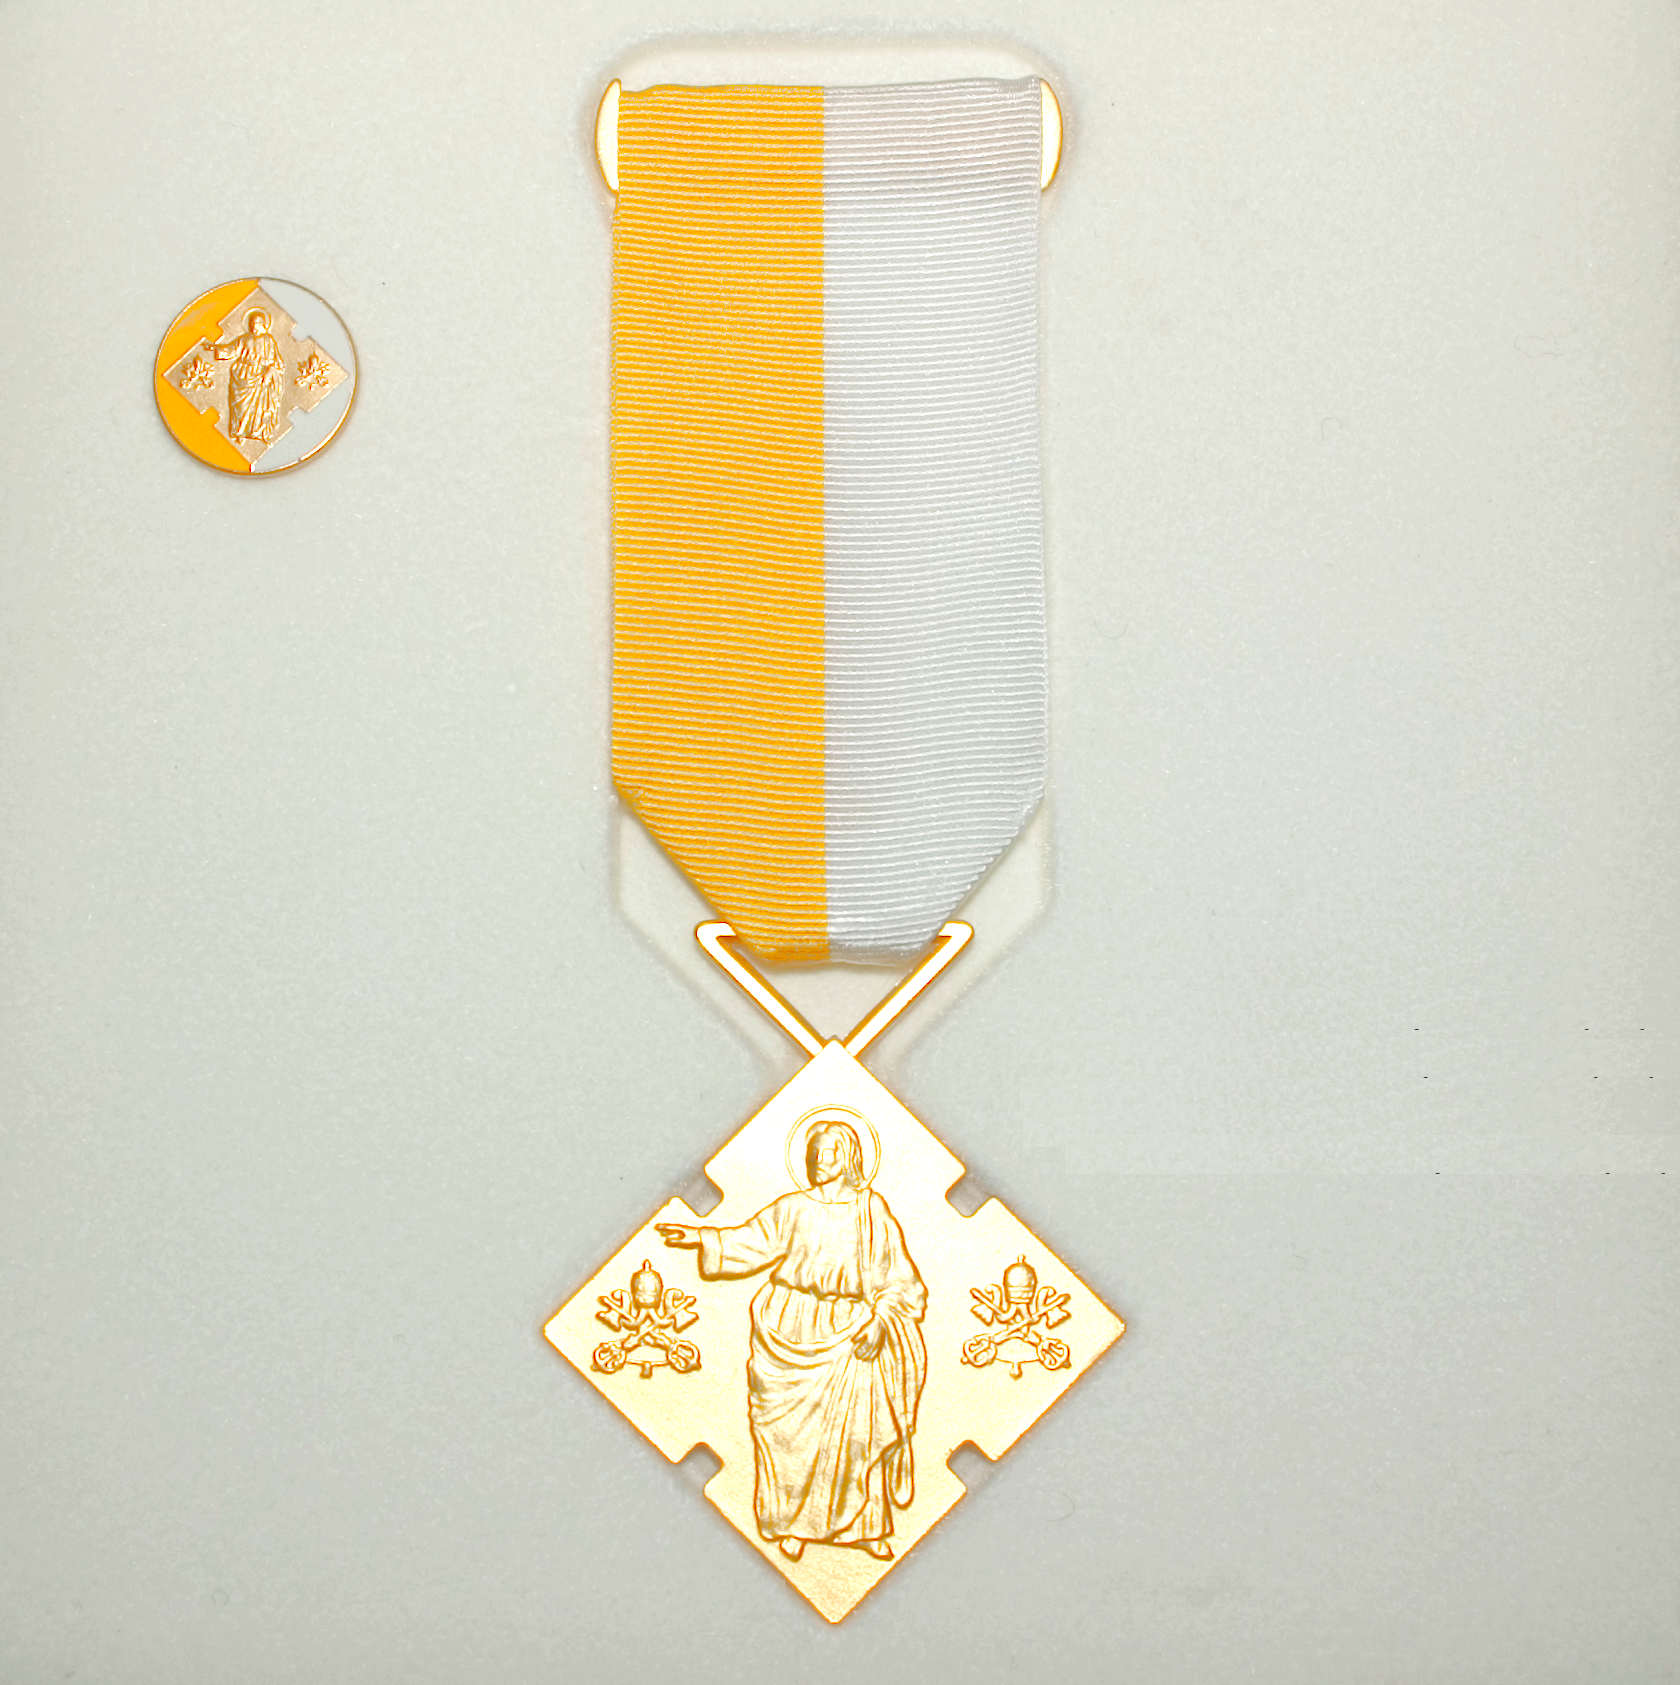 Photograph of the Benemerenti medal awarded to John Parnell Murphy